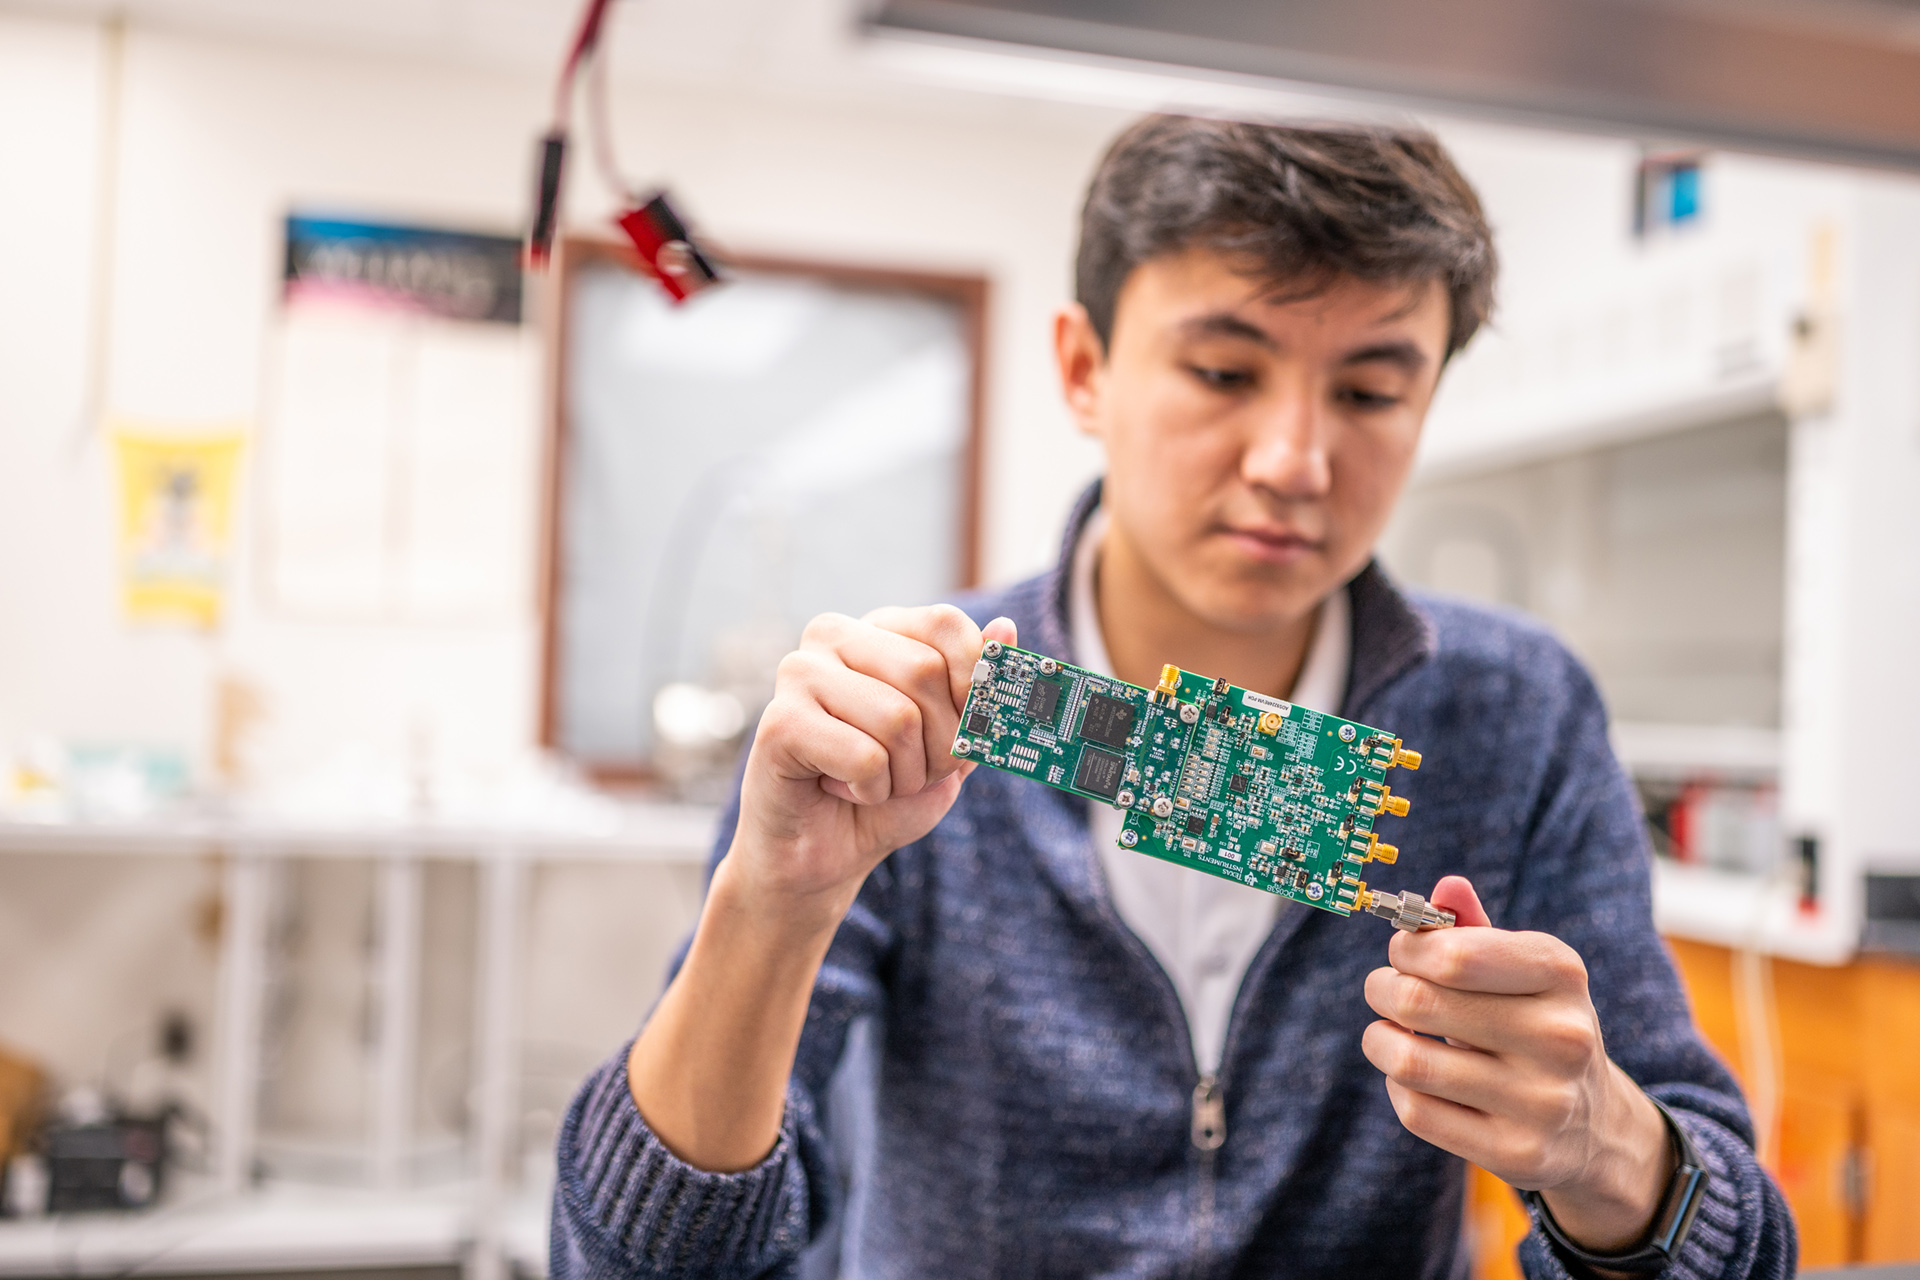 Dimash Aimurzayev, a master’s student in electrical engineering at MSU, examines a circuit board. Electronics like this will be tested at the new Space Electronics Center. Credit: Derrick L. Turner